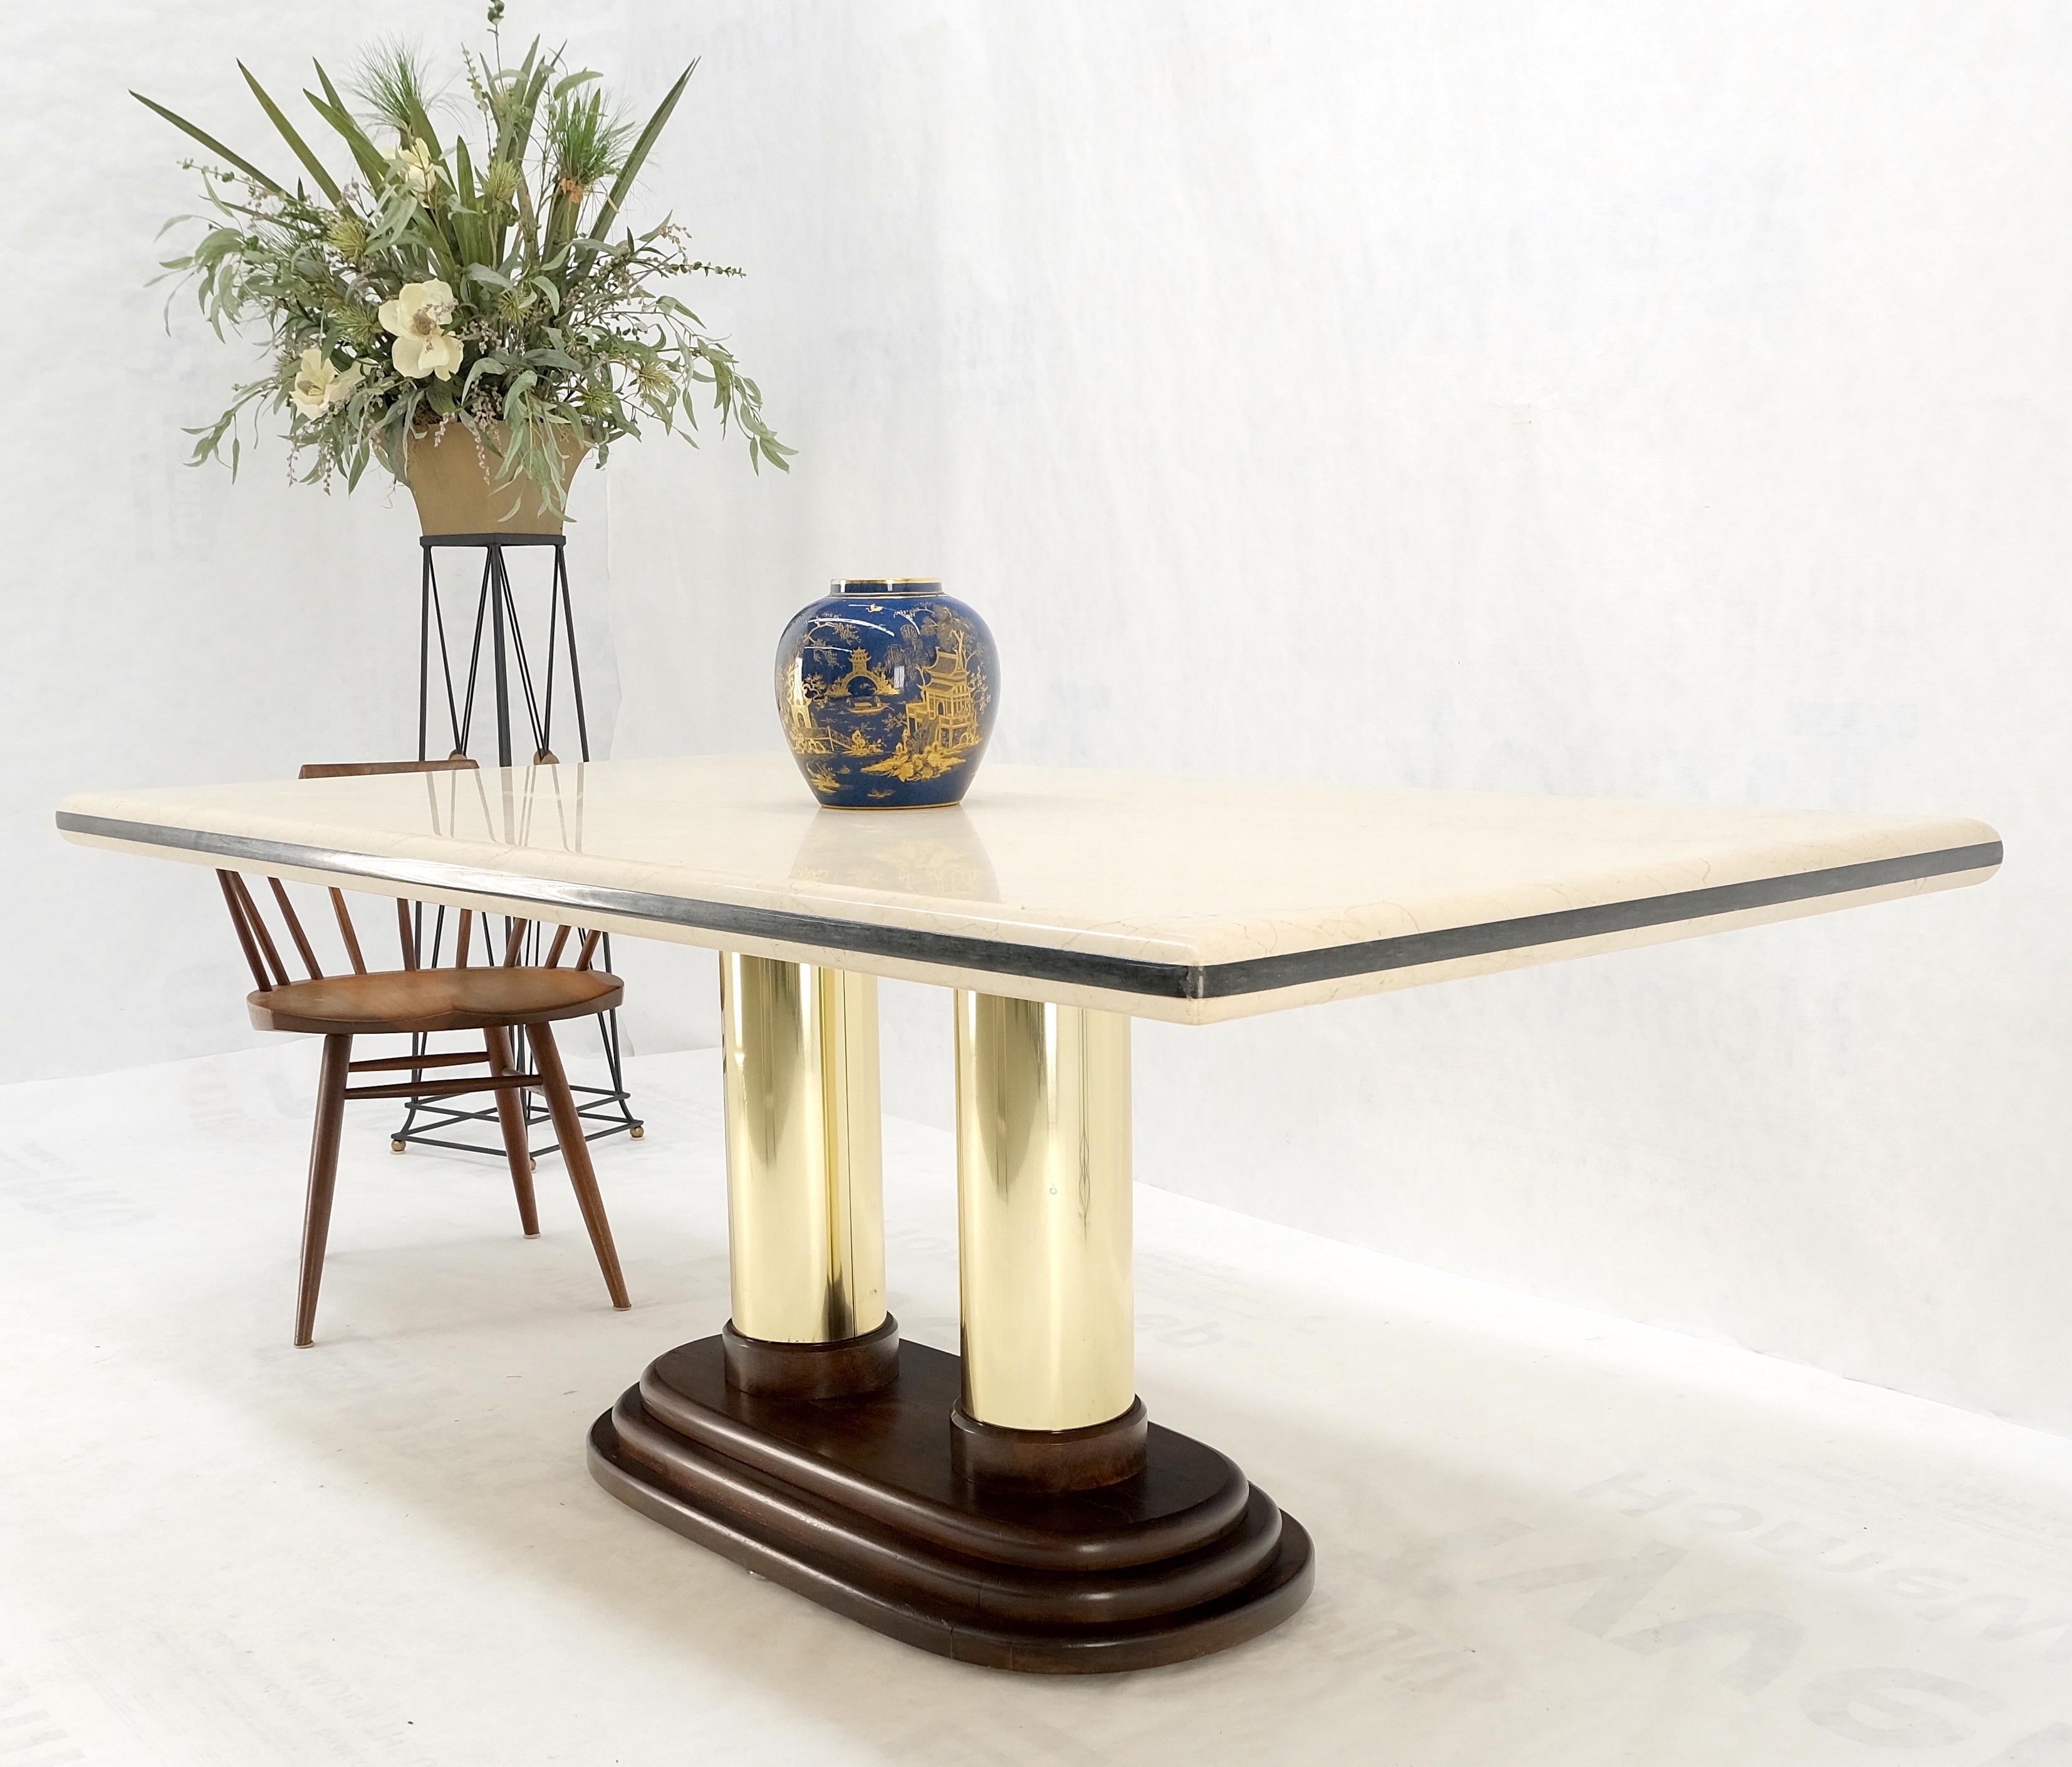 Rounded edge two tone marble top single brass pedestal base dining conference table mint!